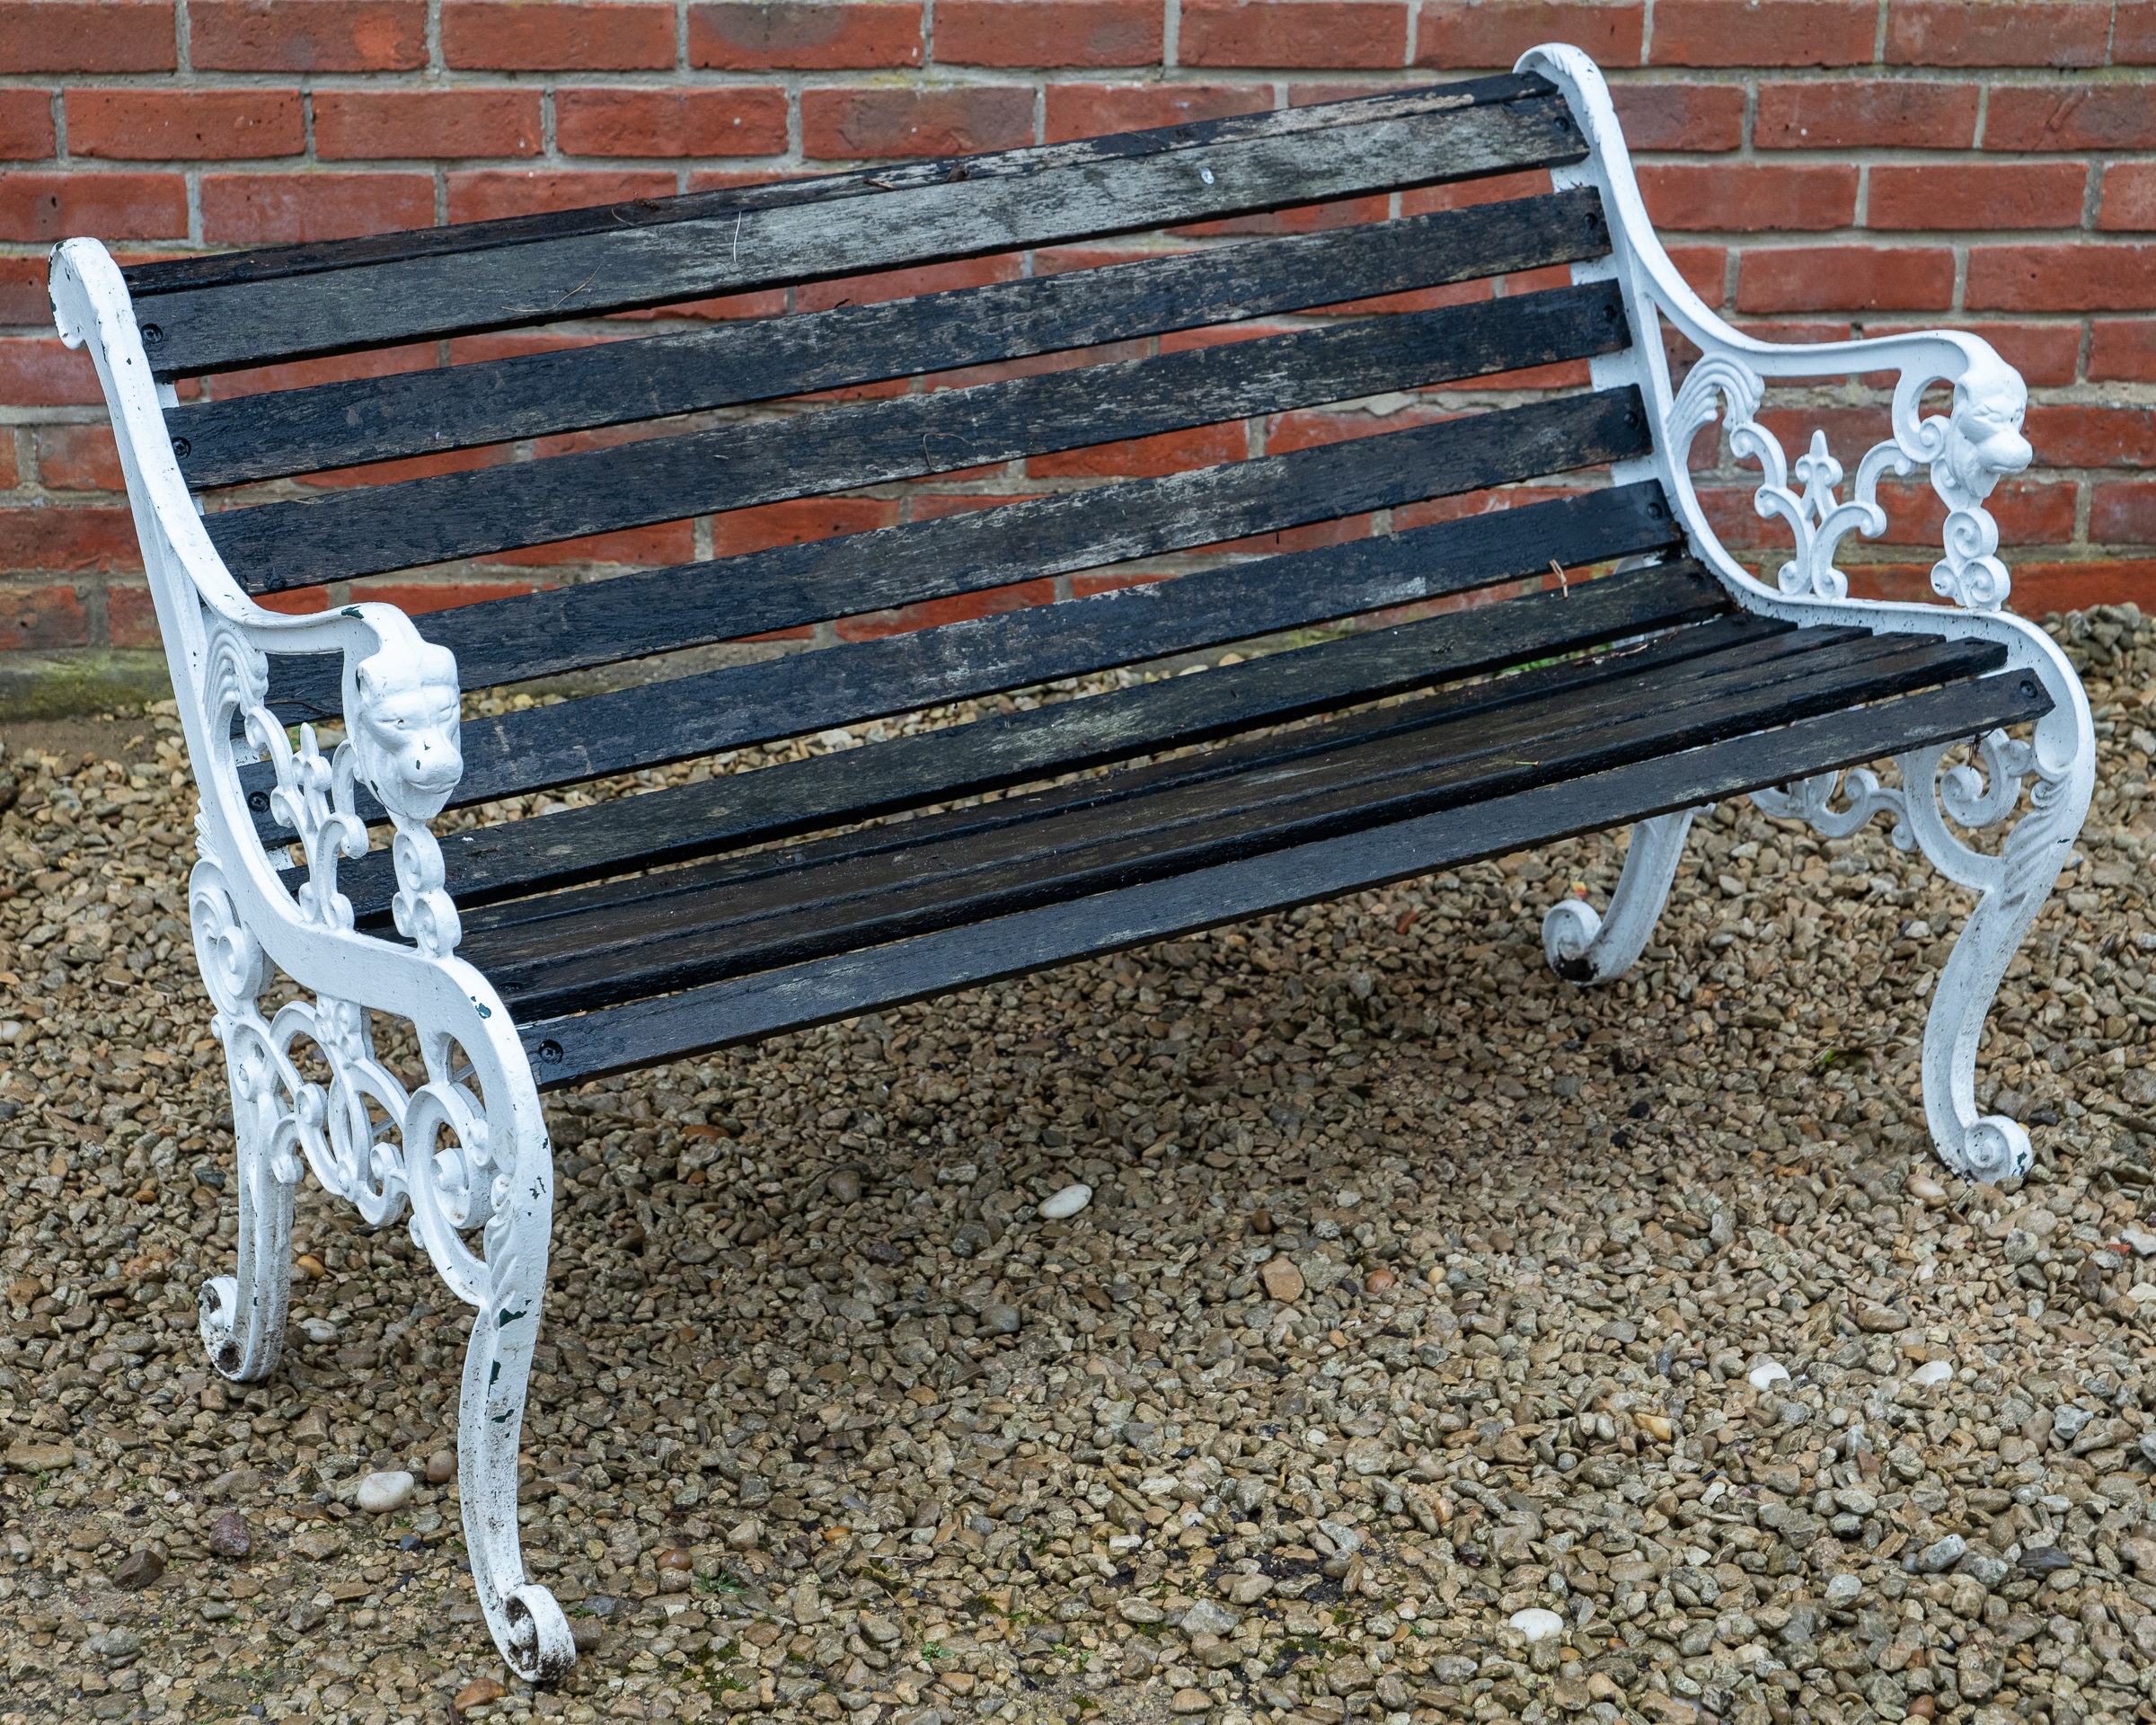 A white-painted bench